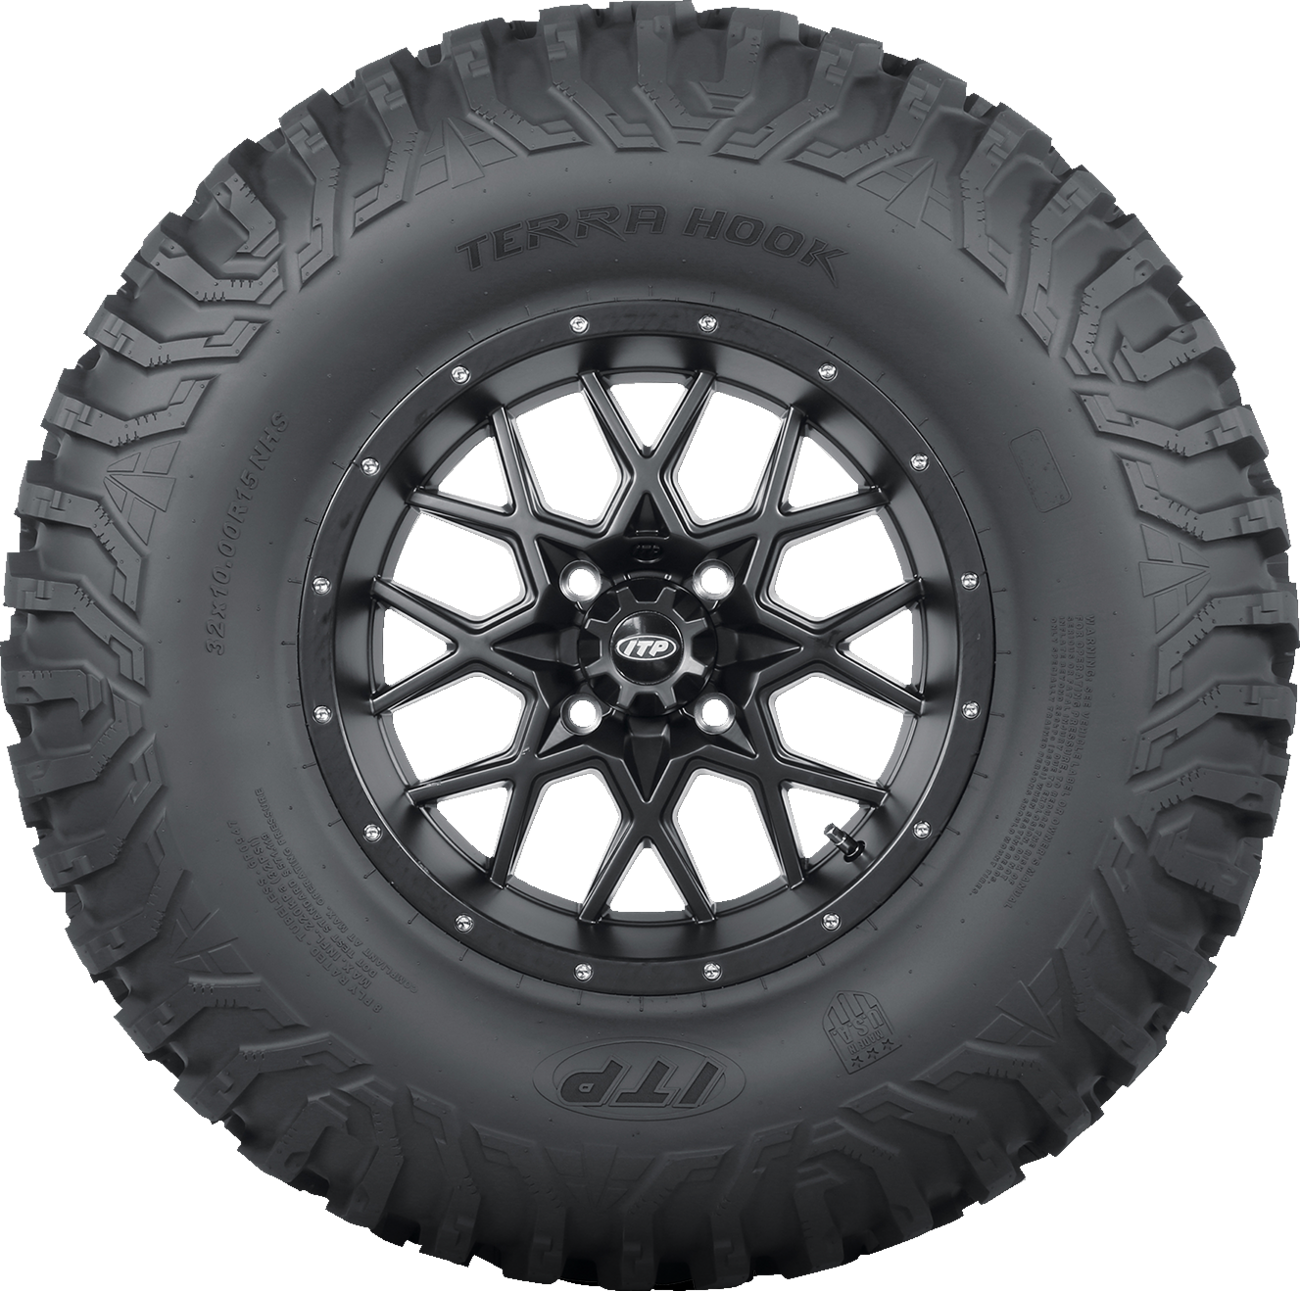 ITP Tire - Terra Hook - Front/Rear - 30x10R14 - 8 Ply 6P0945